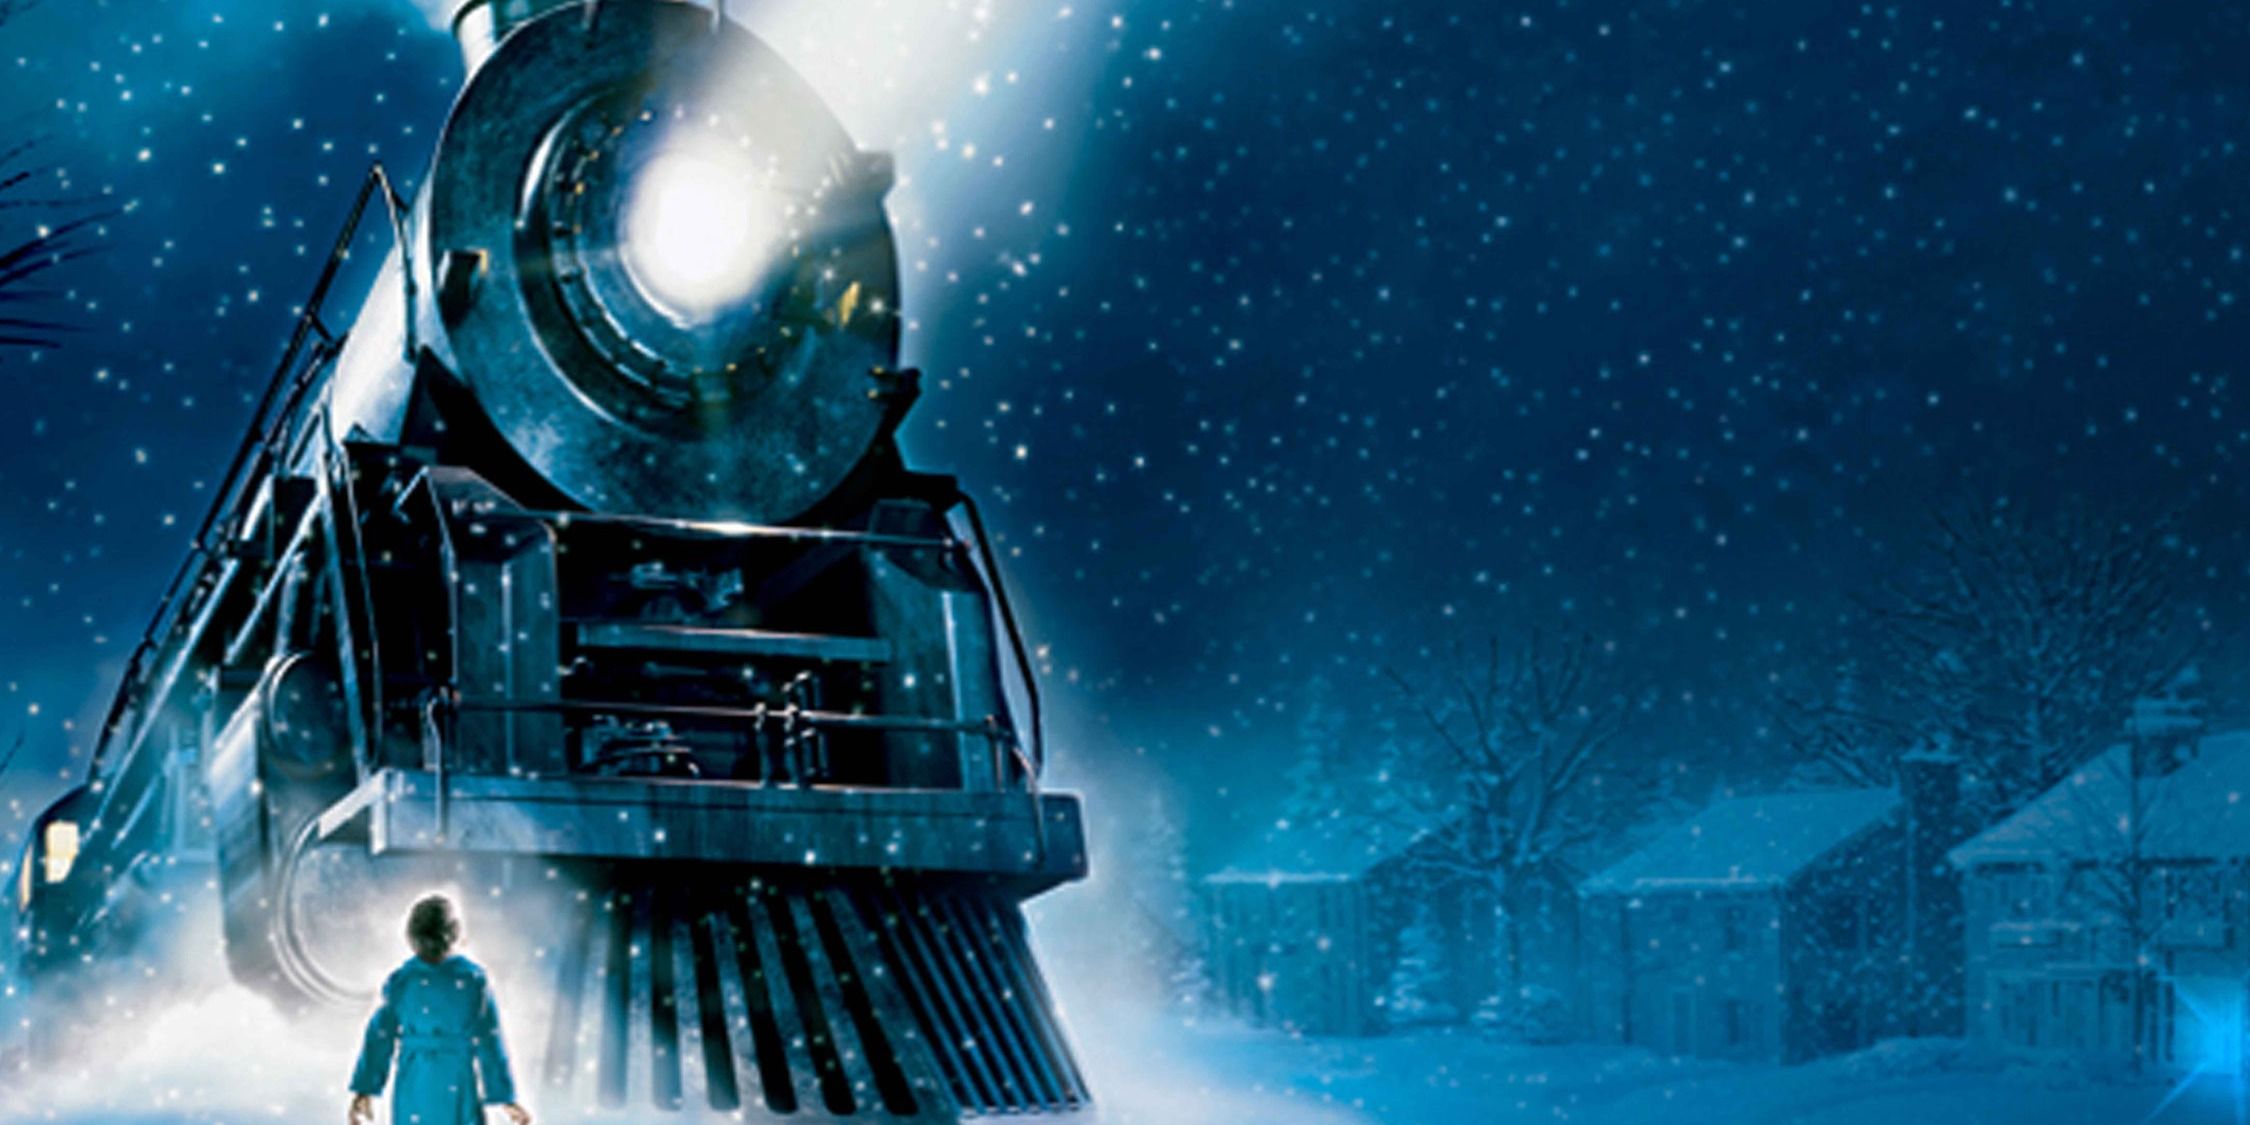 The train arrives in The Polar Express